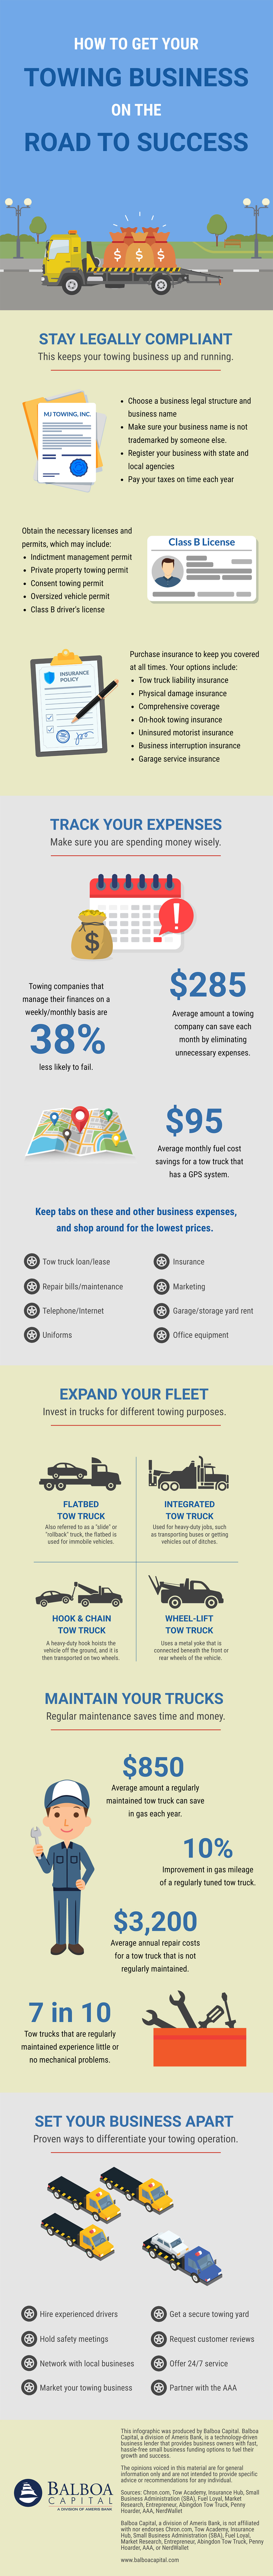 Towing Business Success Infographic